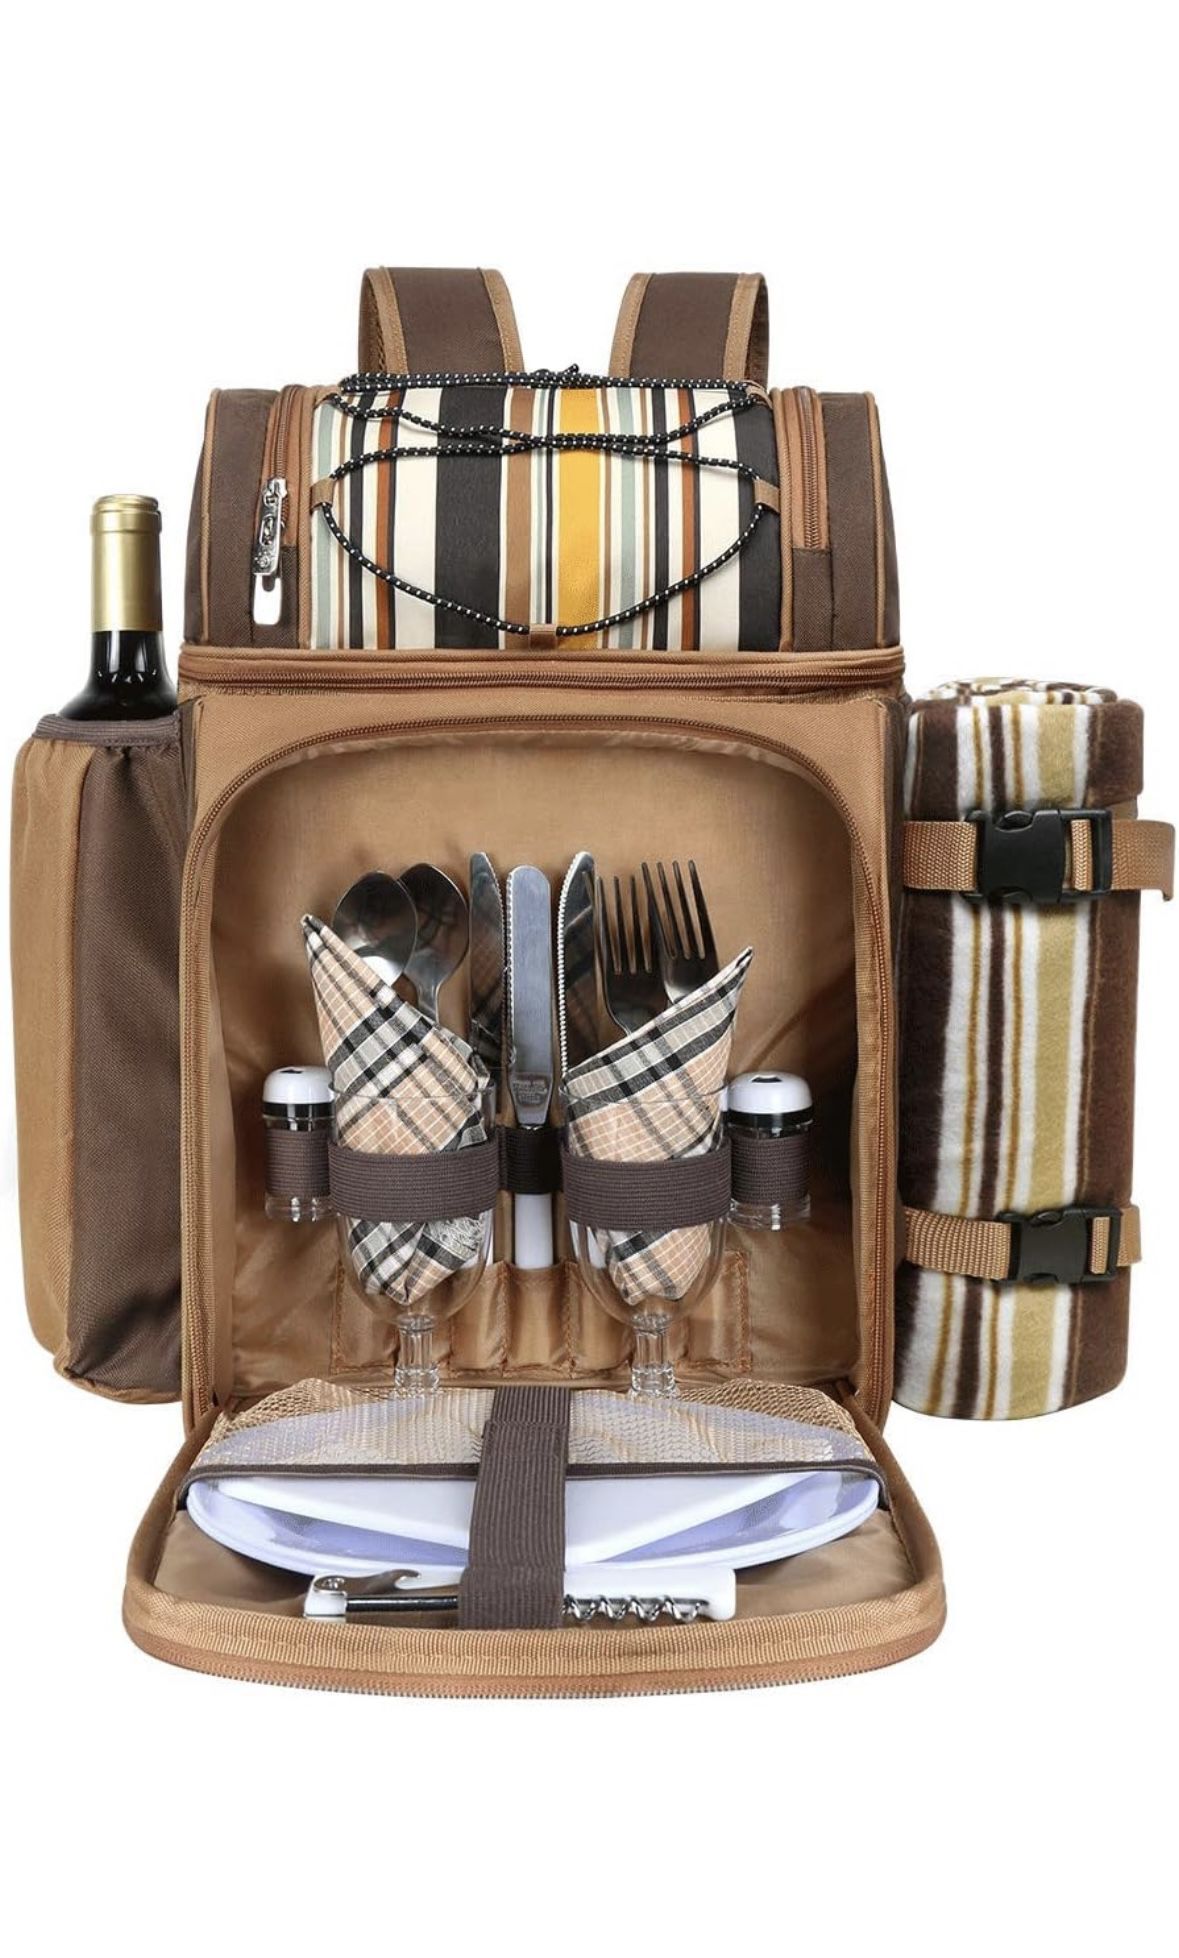 Hap Tim Picnic Basket Backpack for 2 Person with 2 Insulated Cooler Compartment, Wine Holder, Fleece Blanket, Cutlery Set